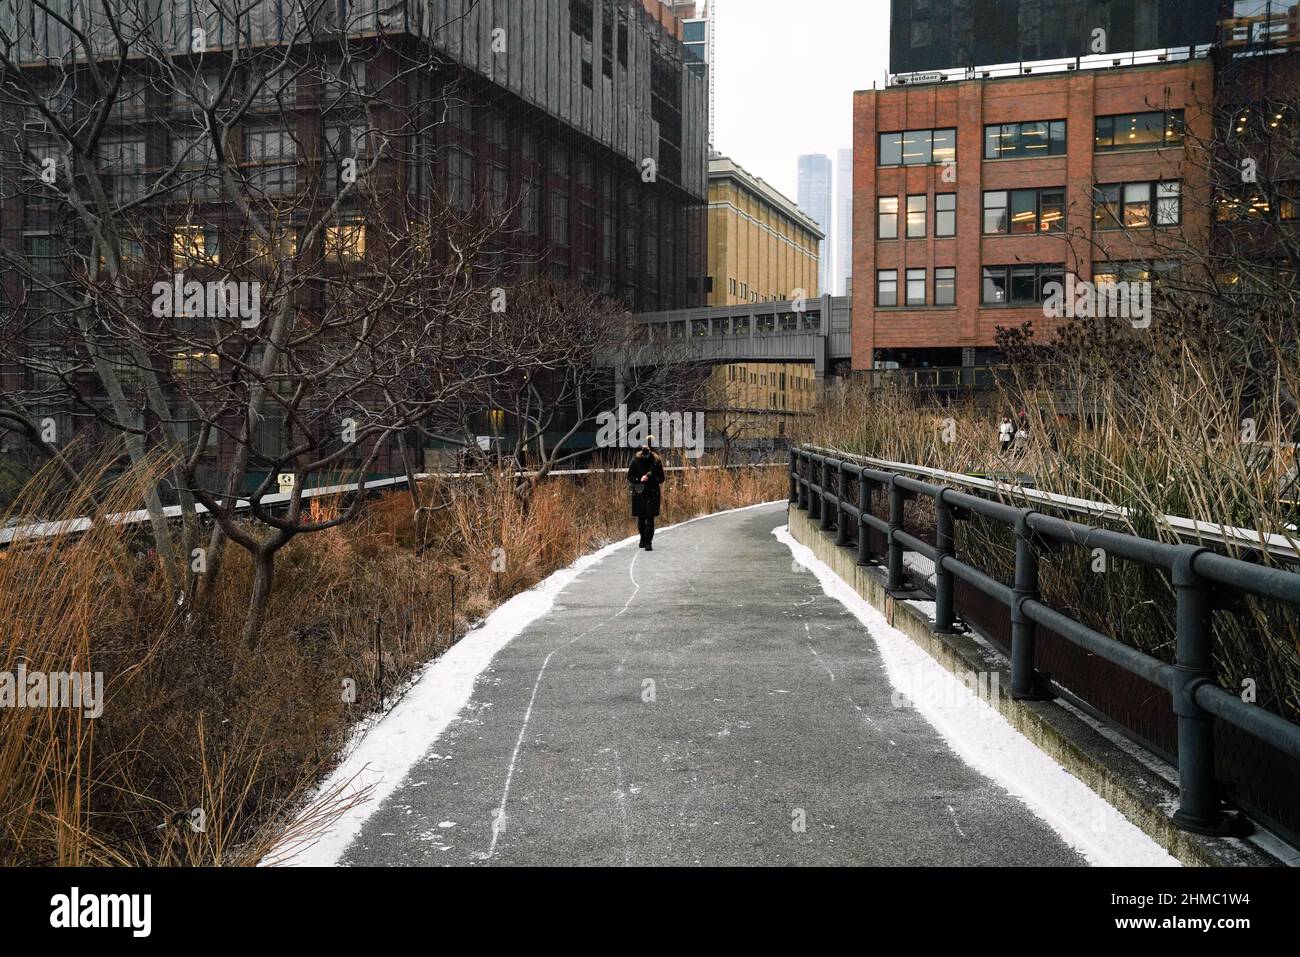 People strolling on the High Line, an elevated urban park on the formerly disused railway viaduct, on the west side of Manhattan, New York. Stock Photo